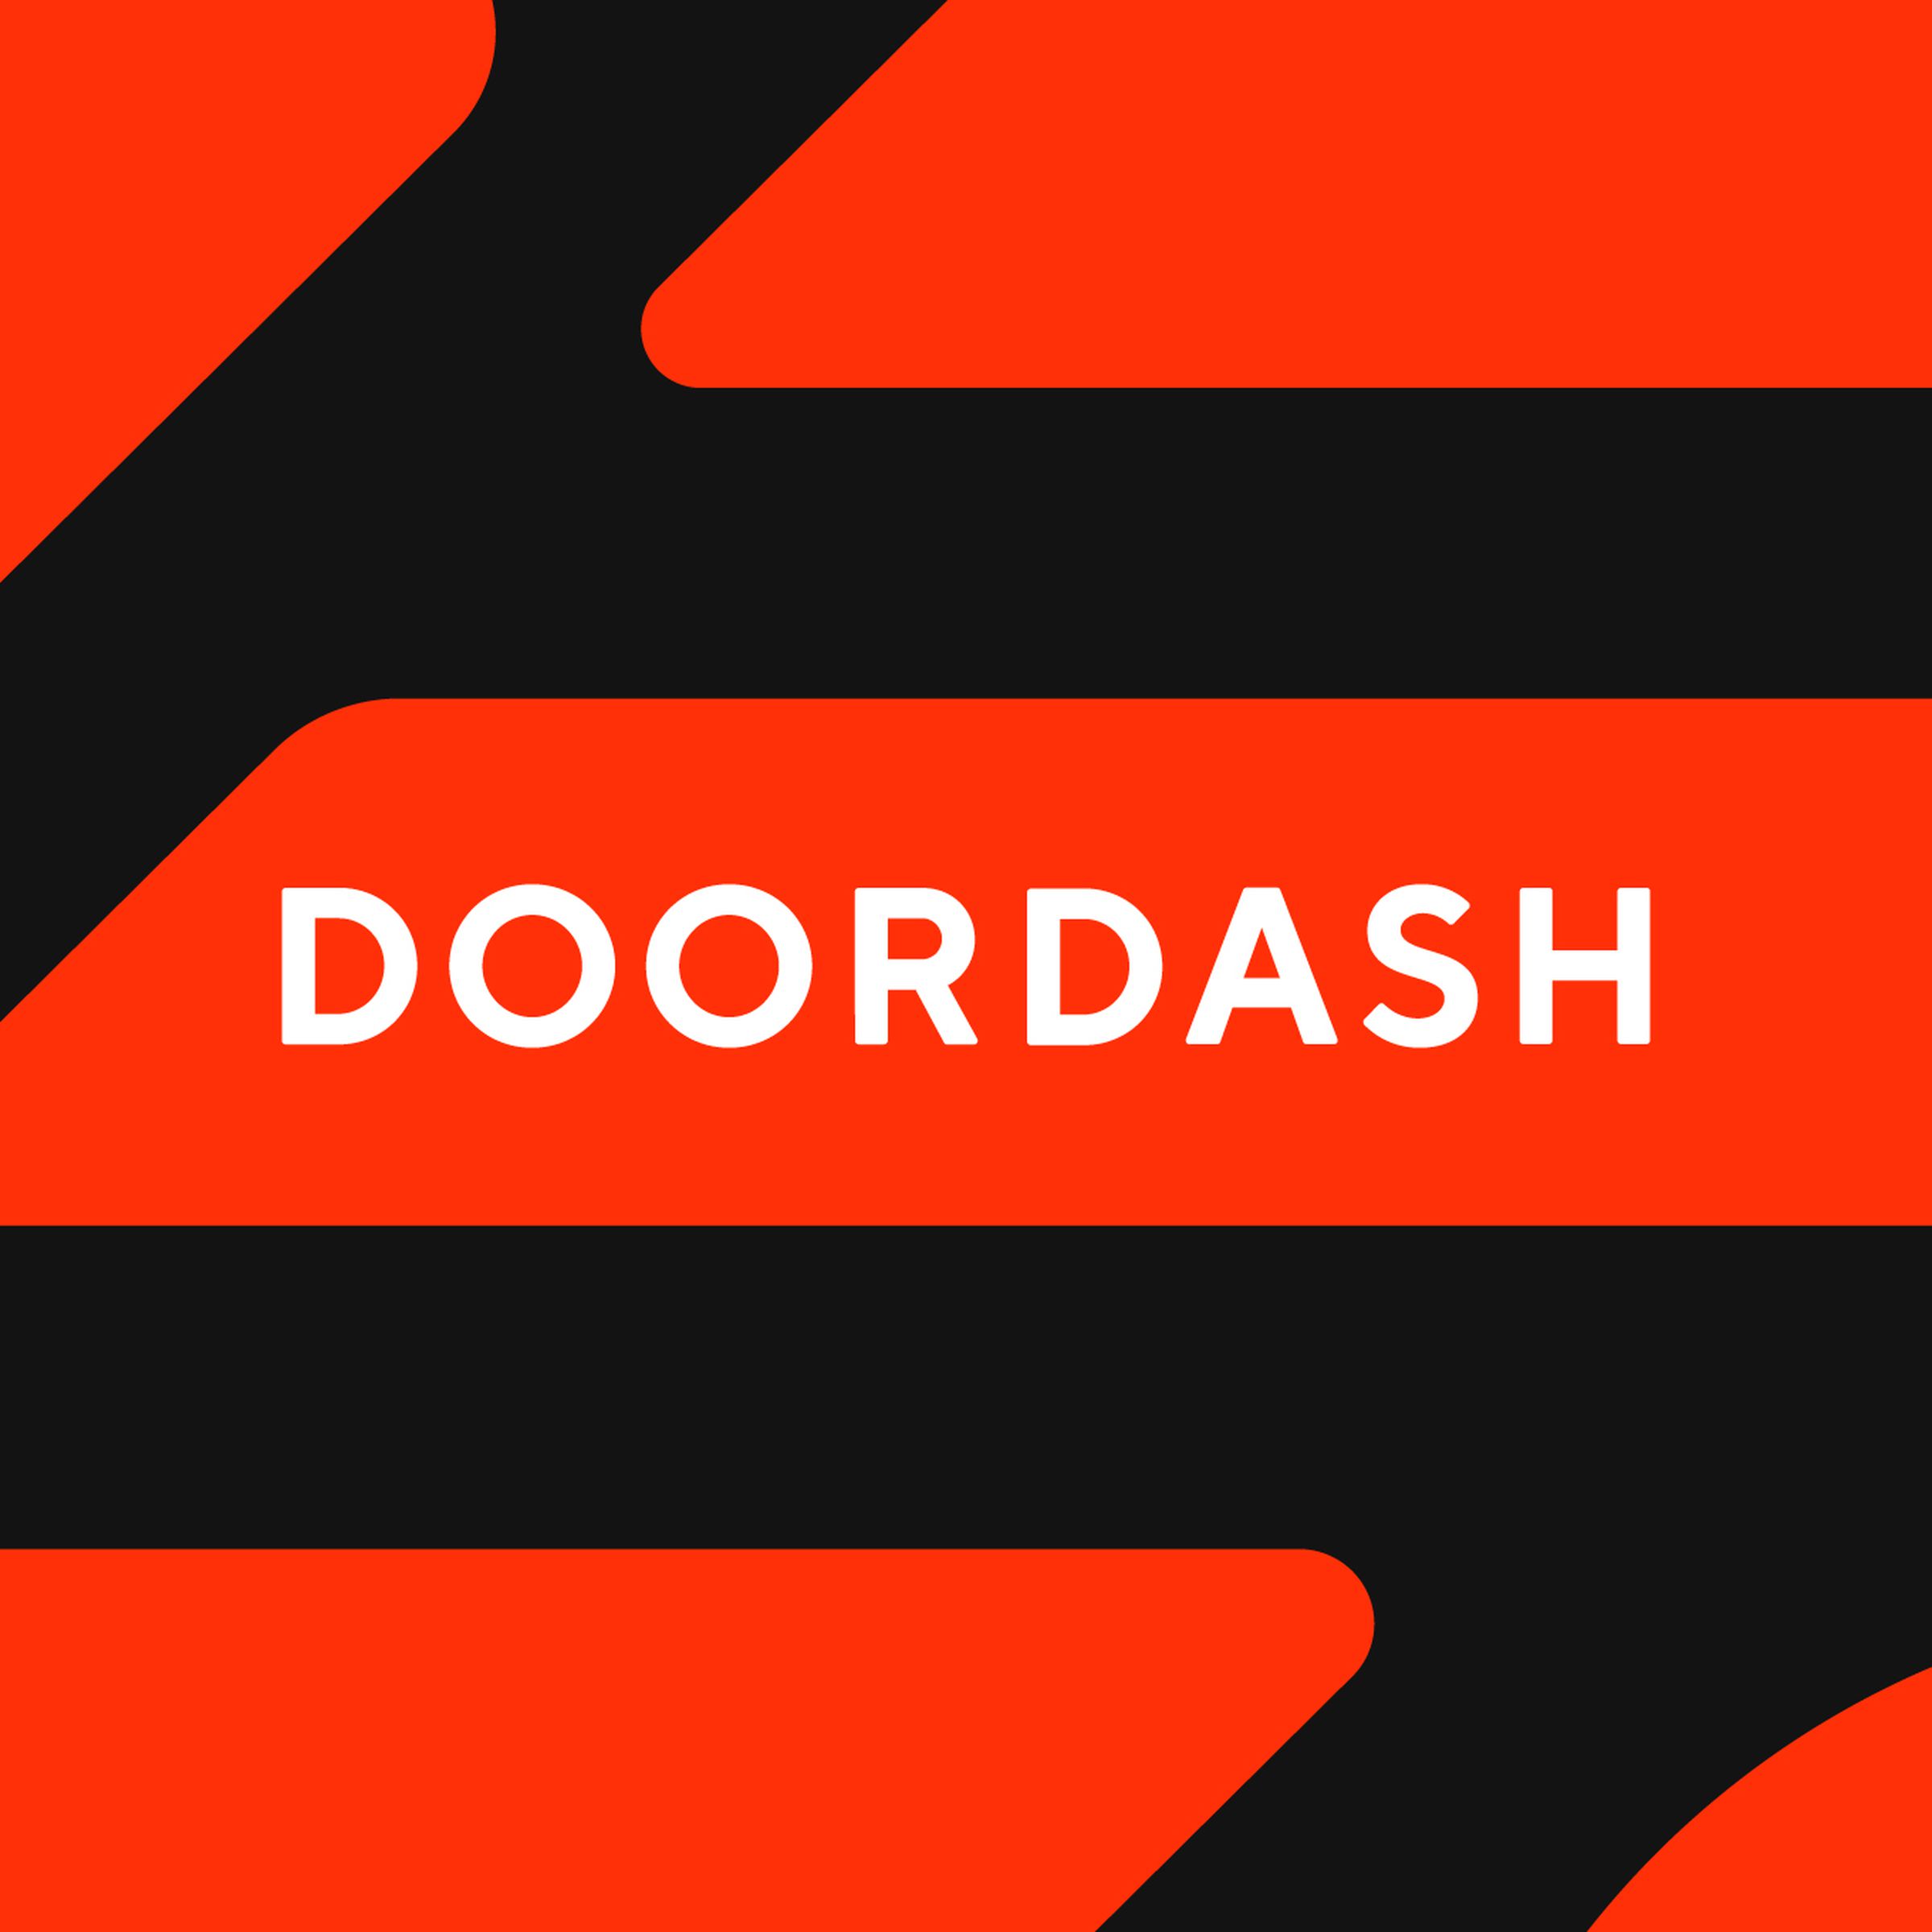 DoorDash’s logo on a black and red background